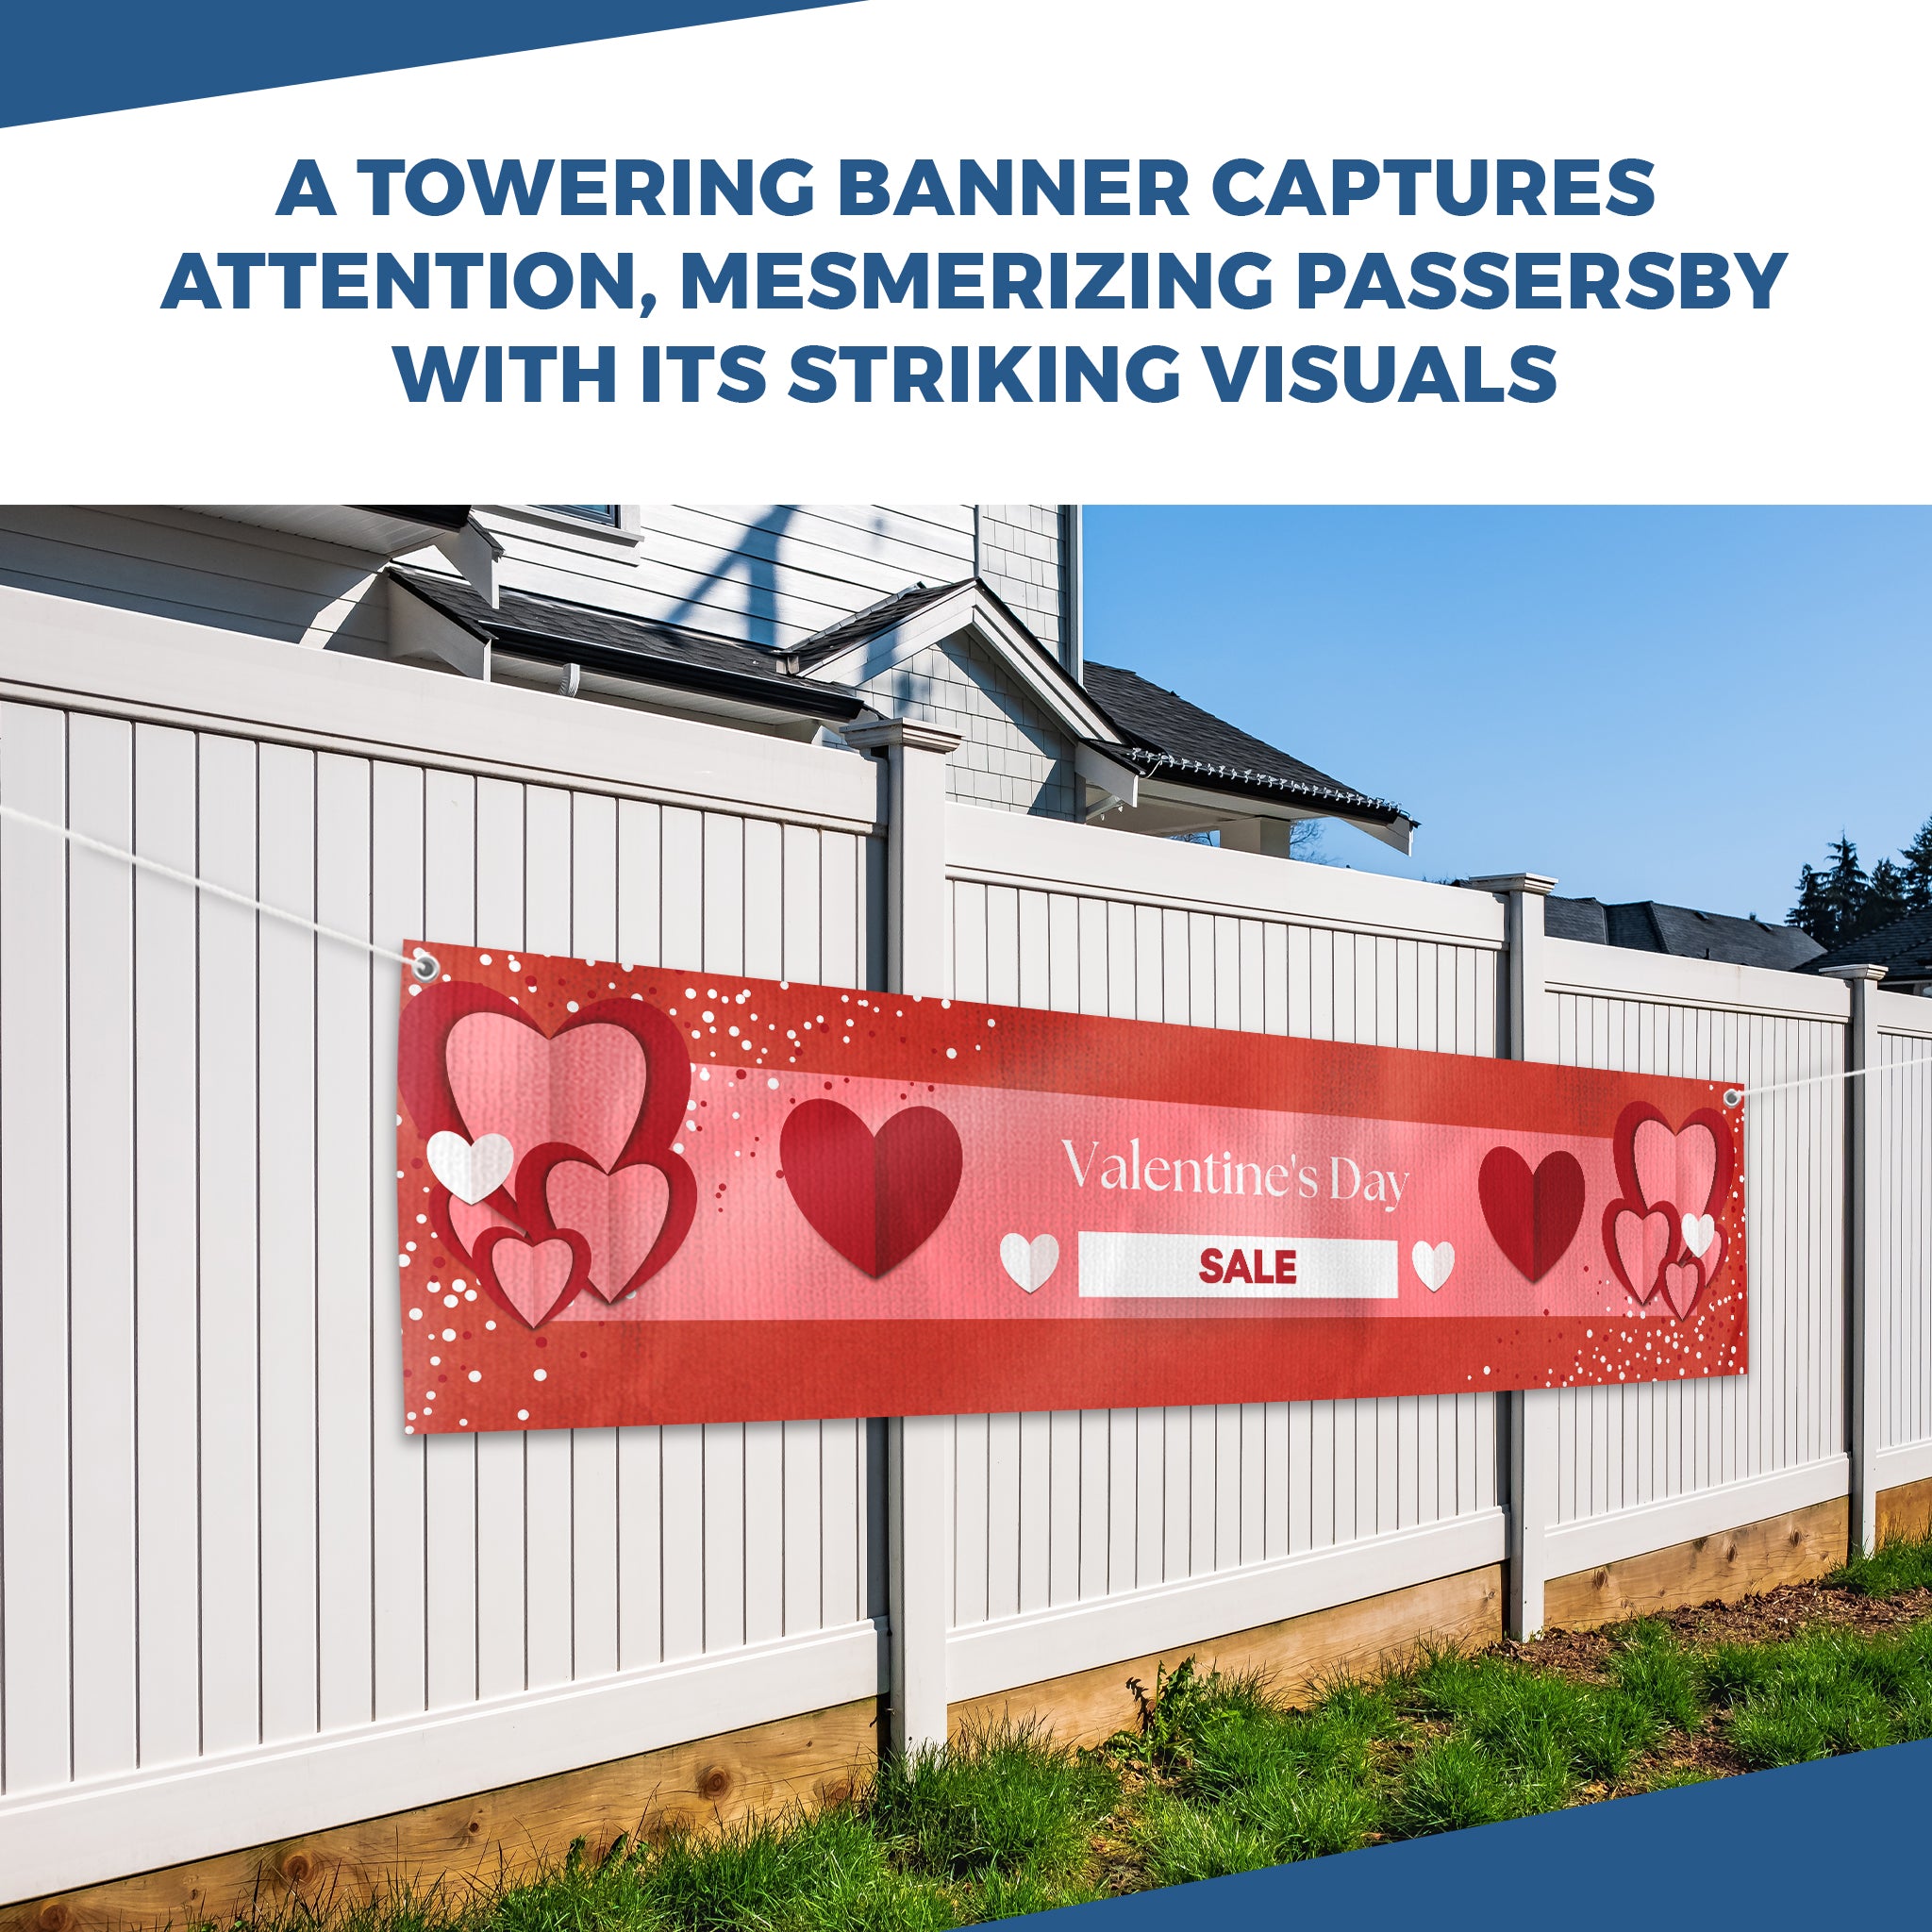 Valentines Day Sale Large Banner